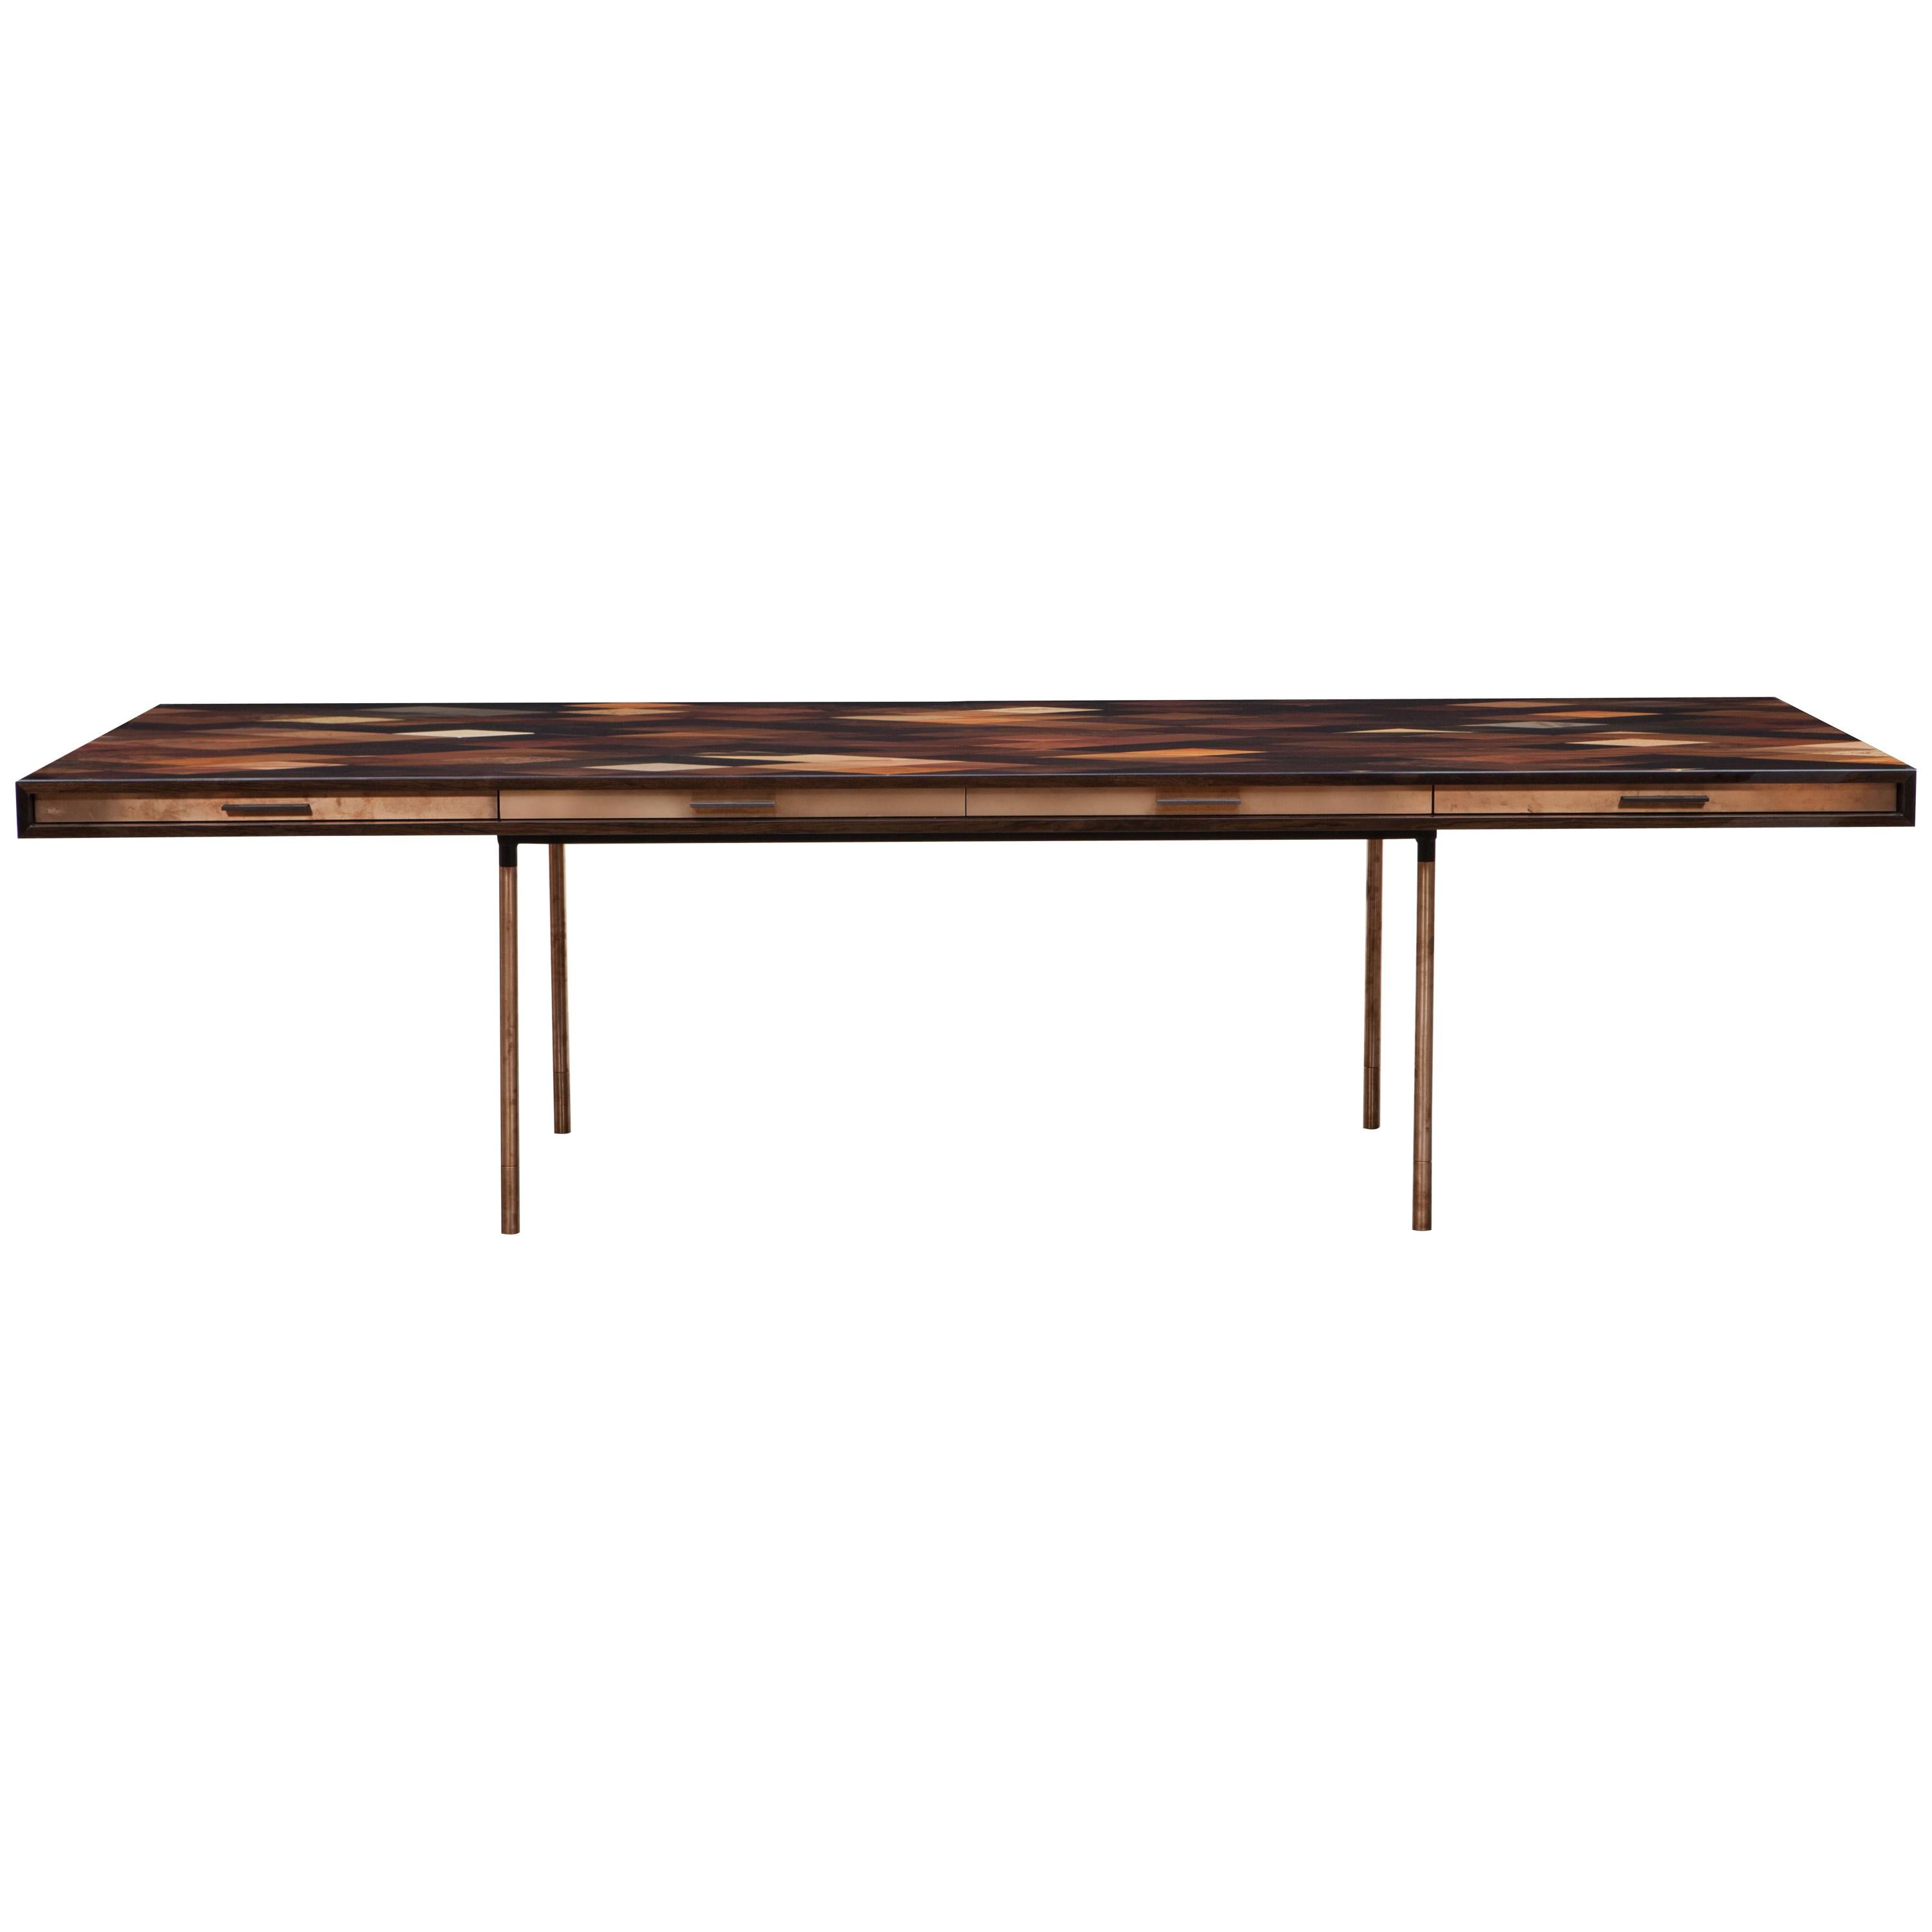 Contemporary Brown Wood and Rosewood Desk by Johannes Hock 'C'